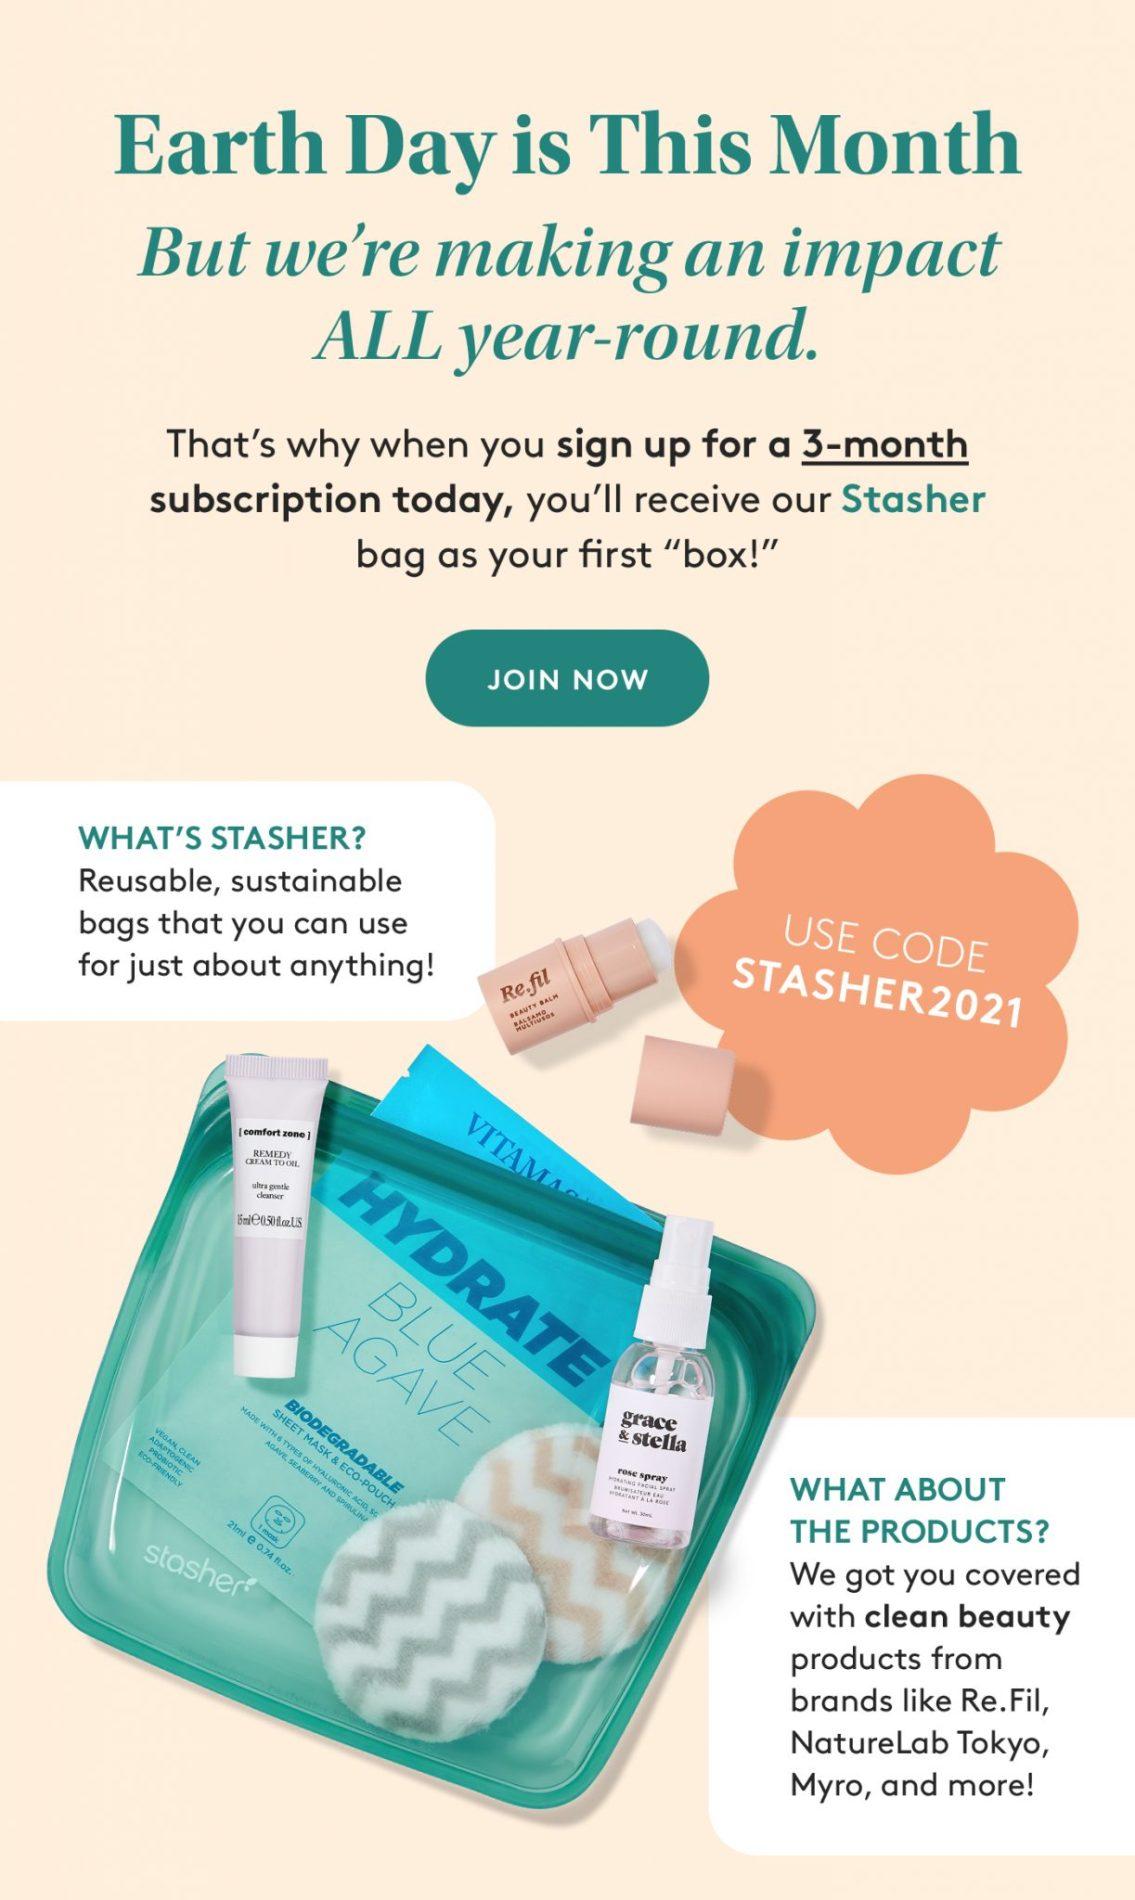 Birchbox Coupon Code – Start Your Subscription With The Stasher Bag!